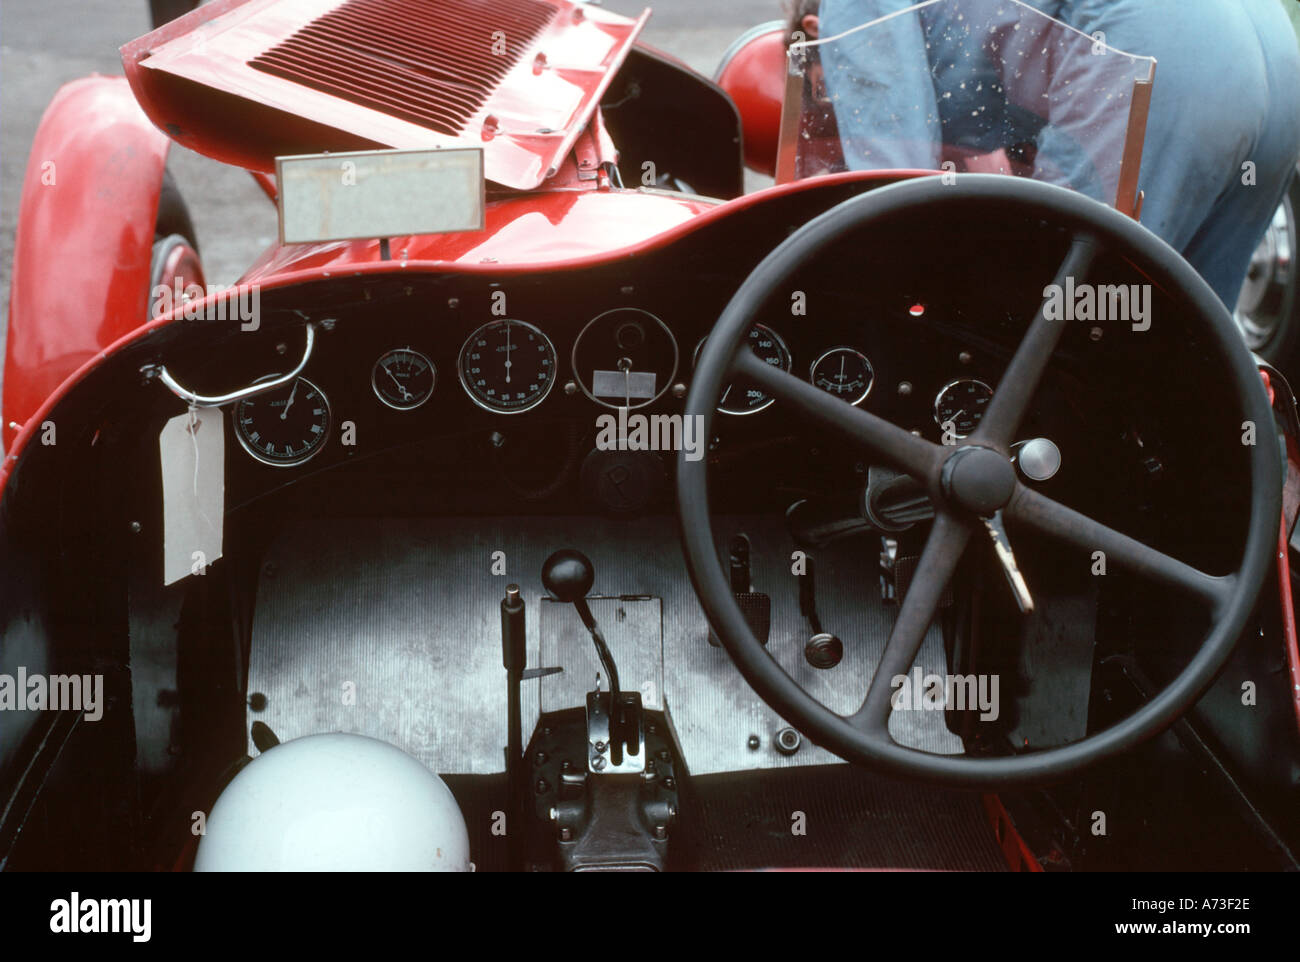 Controls and instruments of an Alfa Romeo sports car of the 1930s pictured at Silverstone Stock Photo